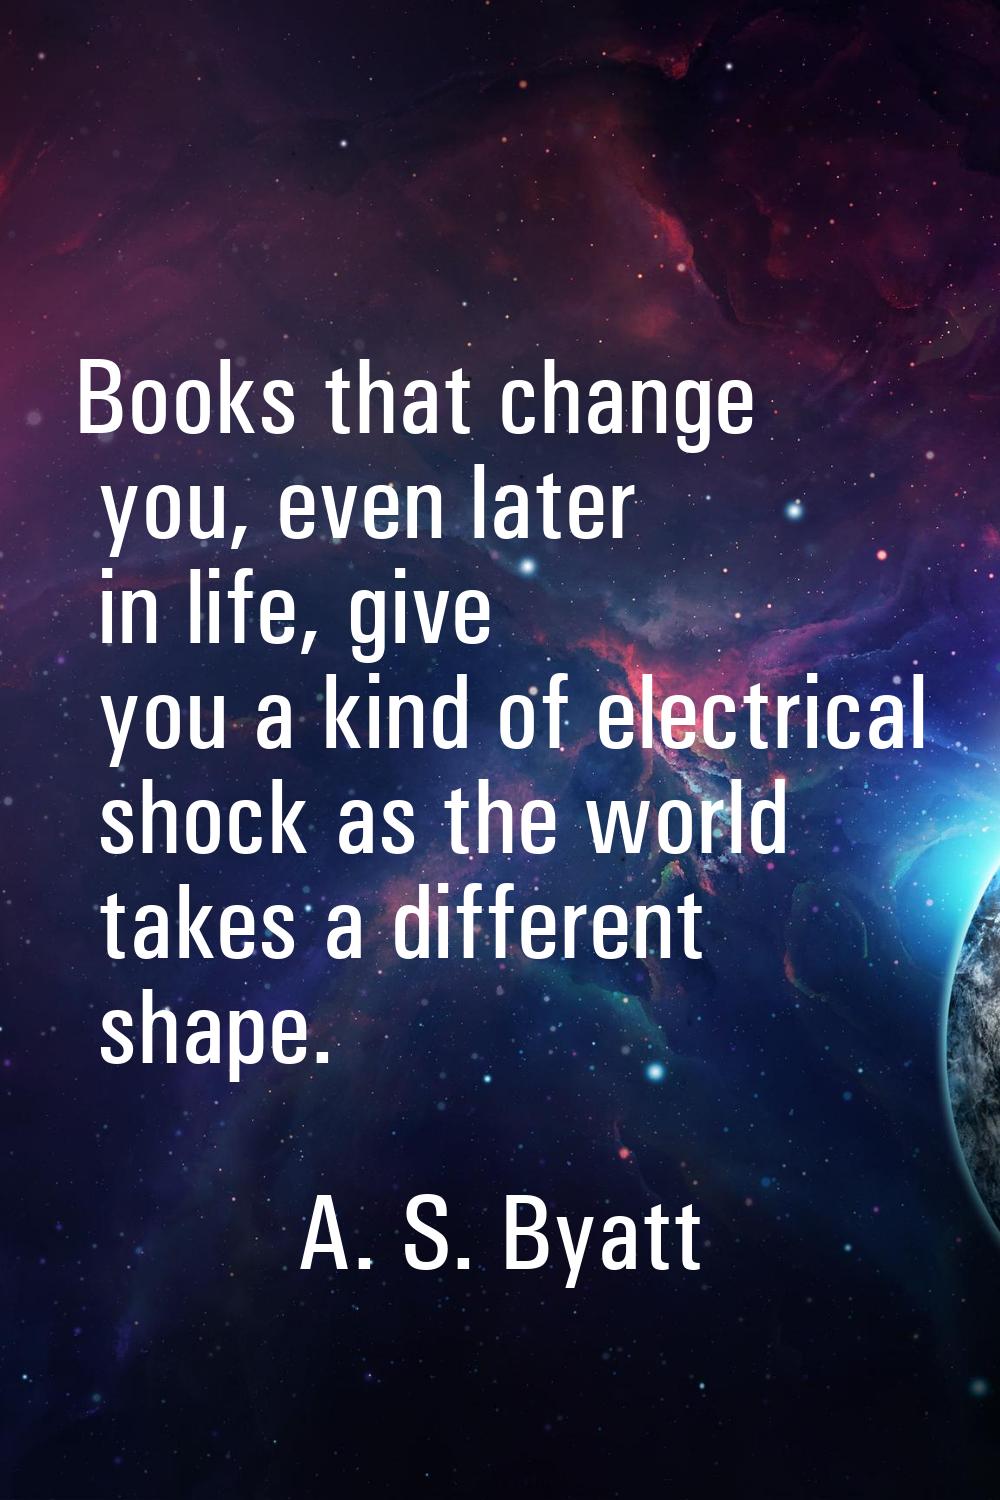 Books that change you, even later in life, give you a kind of electrical shock as the world takes a